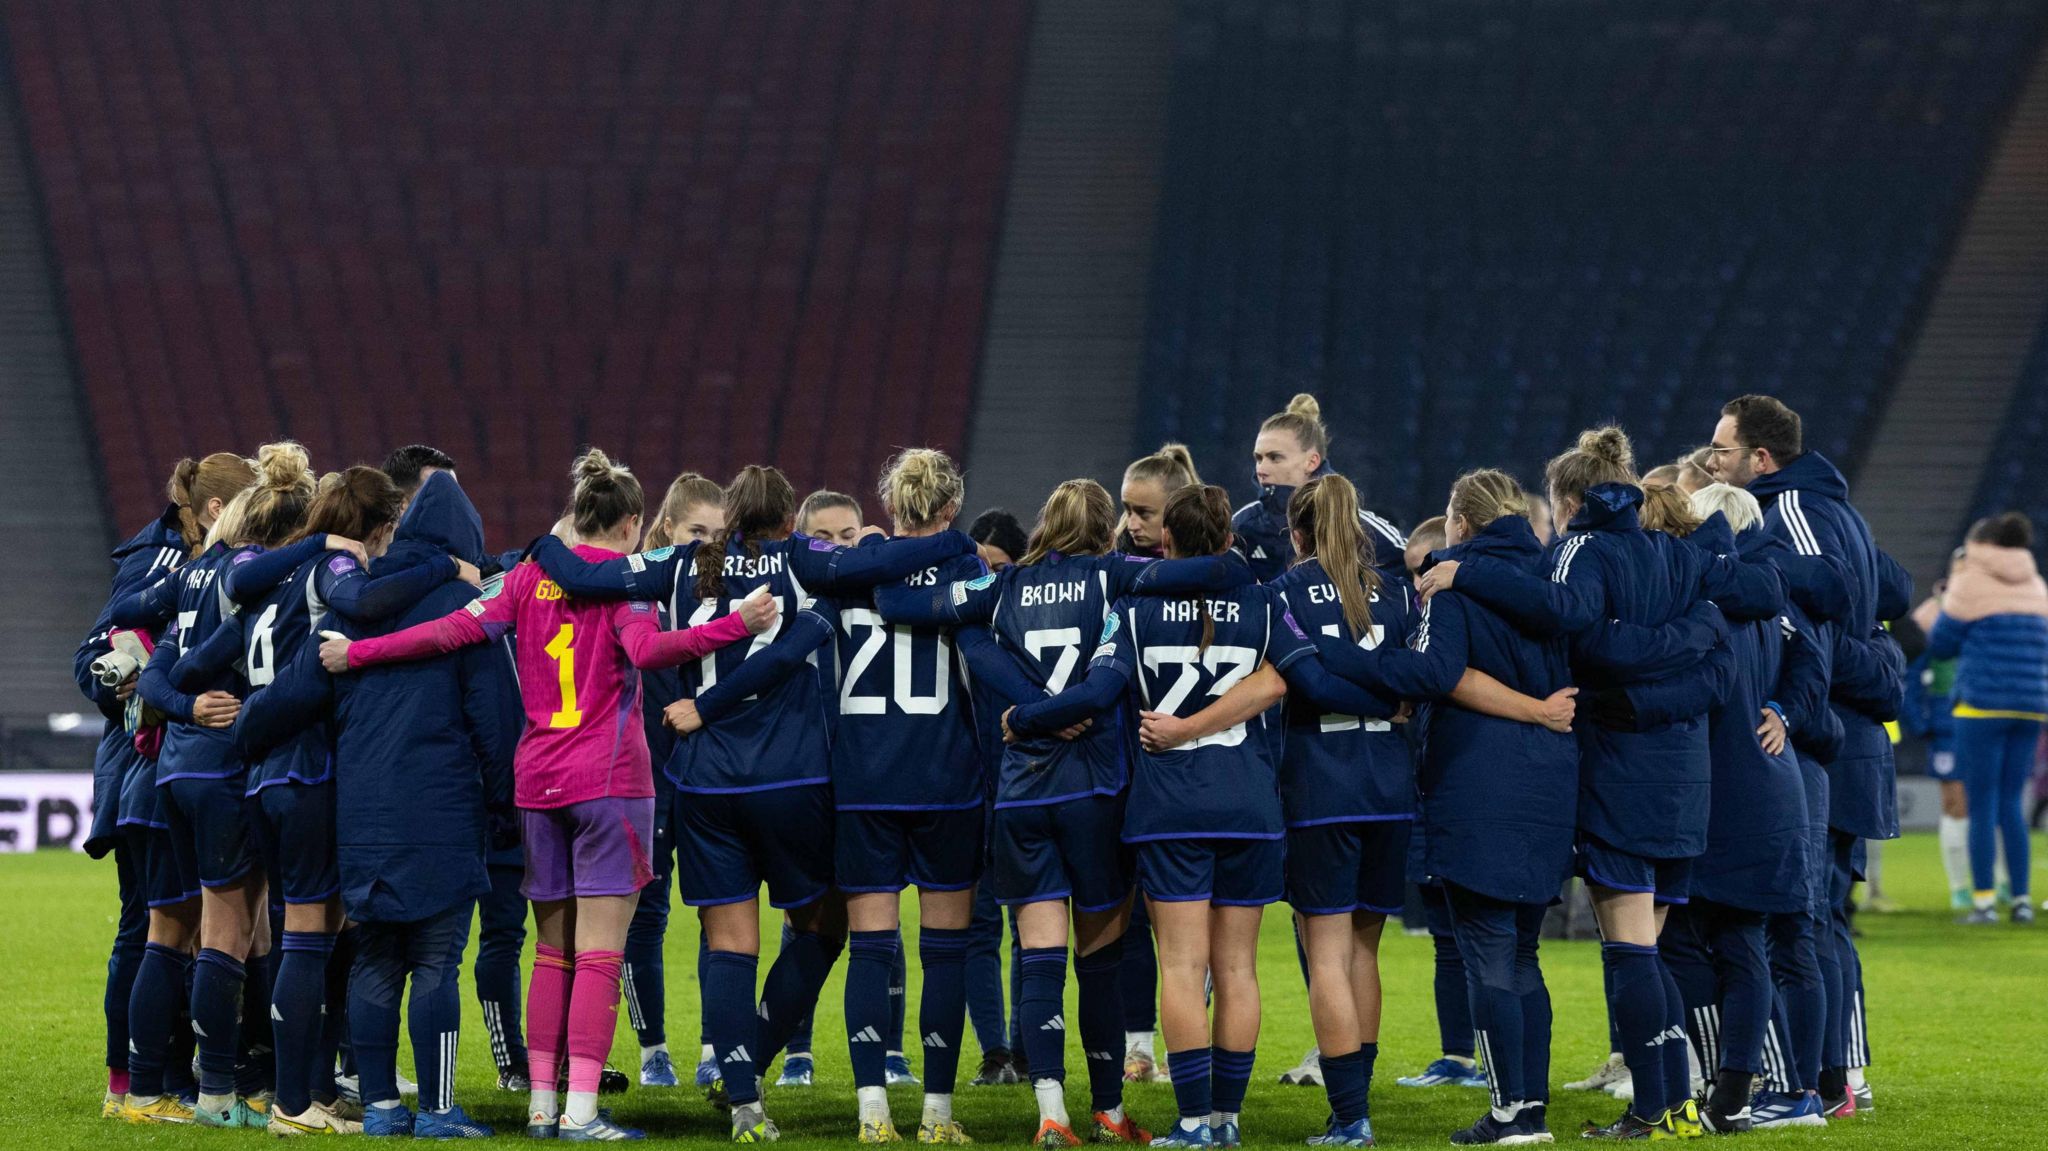 The Scotland squad huddle together at full time during a UEFA Women's Nations League match between Scotland and England at Hampden Park